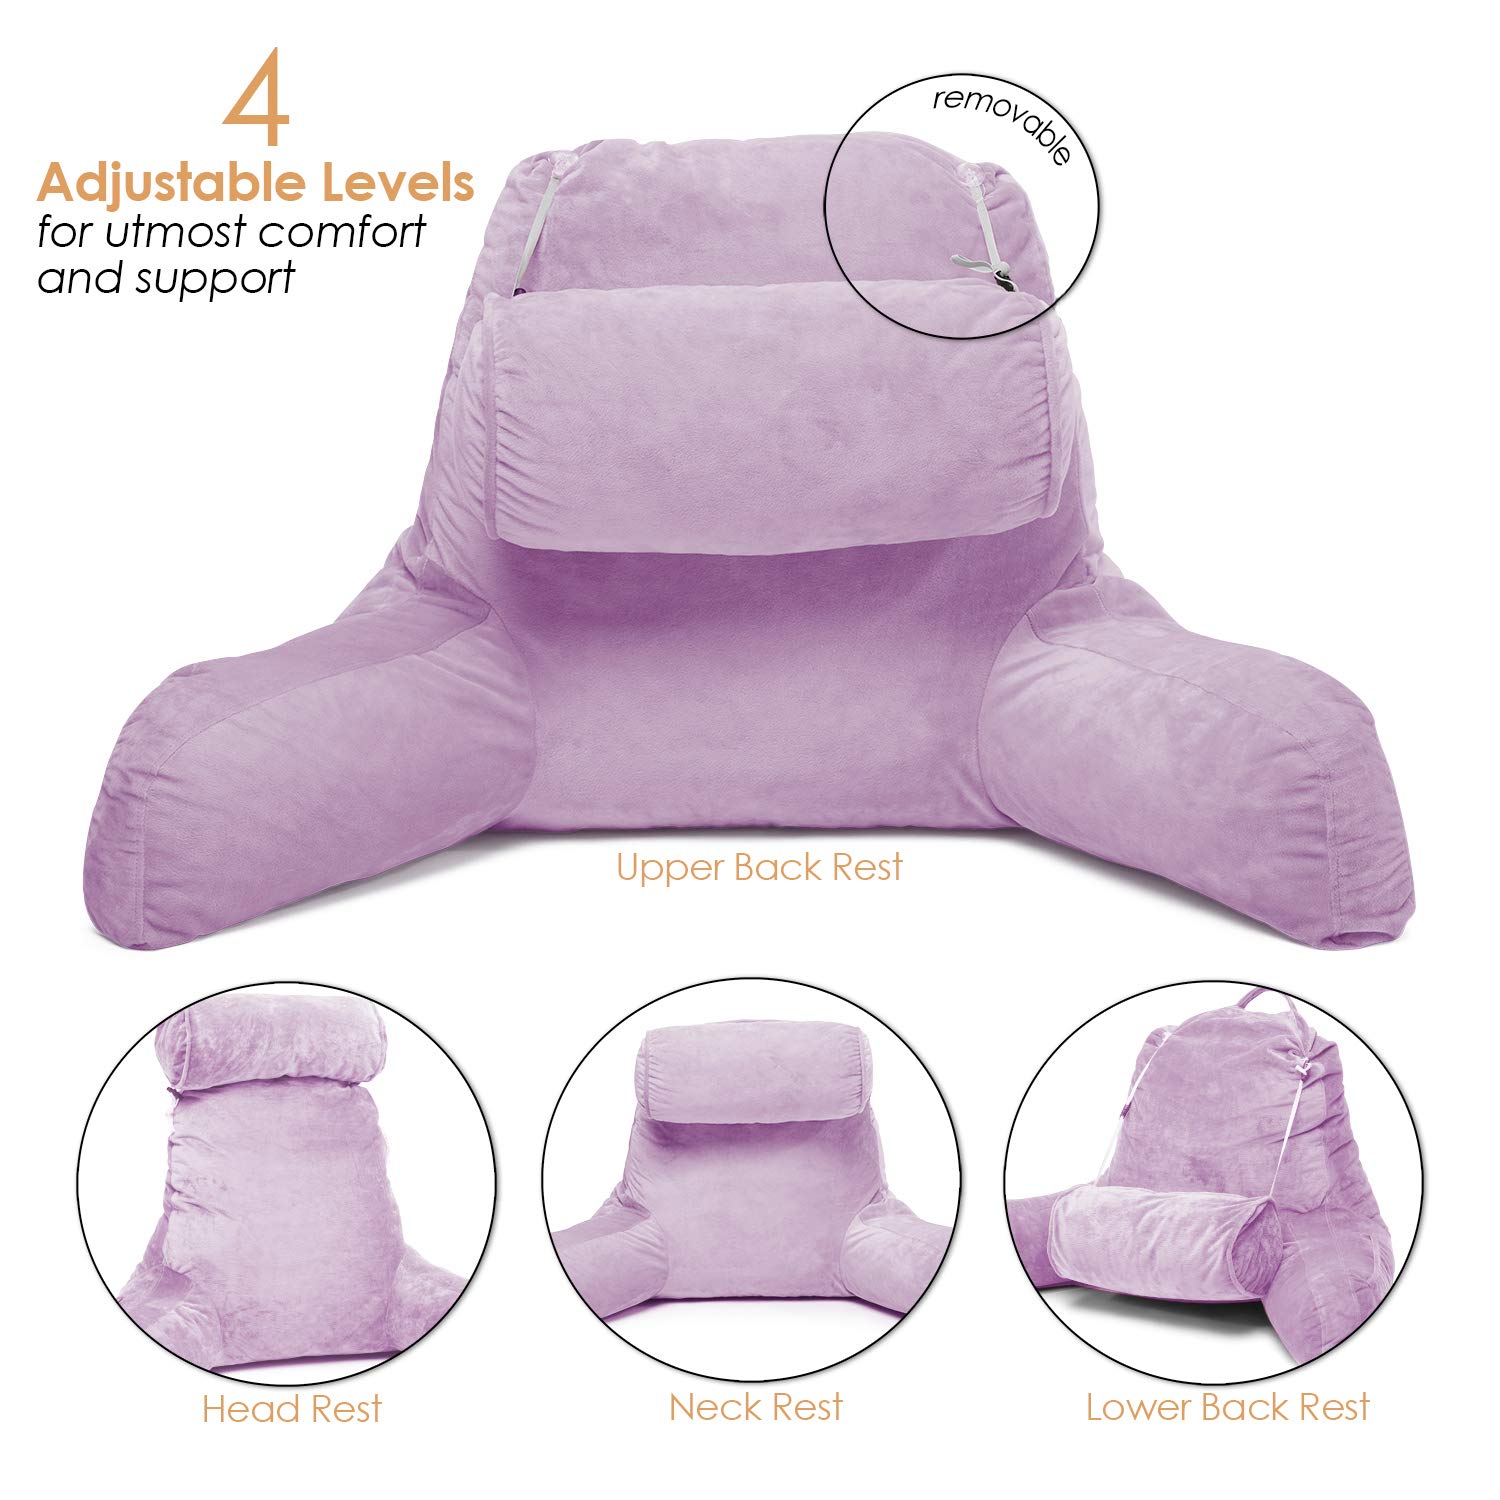 Clara Clark Bed Rest Reading Pillow with Arms and Pockets - Premium Shredded Memory Foam TV Pillow, Detachable Neck Roll & Lumbar Support Pillow, Large, Light Purple - image 3 of 7